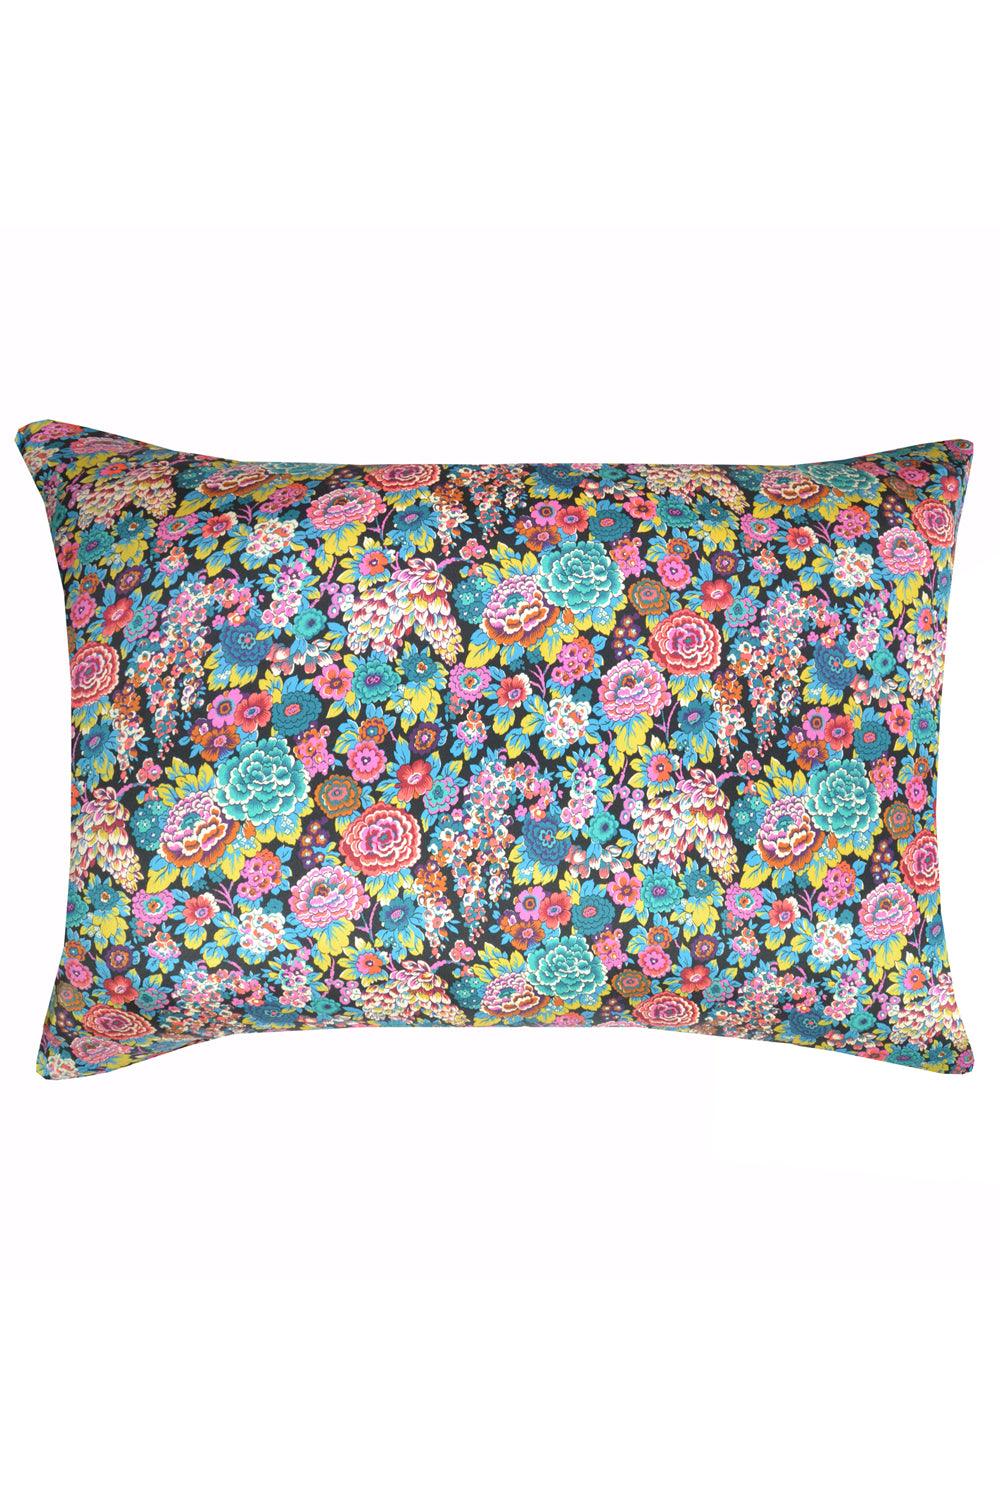 Silk Pillowcase made with Liberty Fabric ELYSIAN DAY PINK - Coco & Wolf